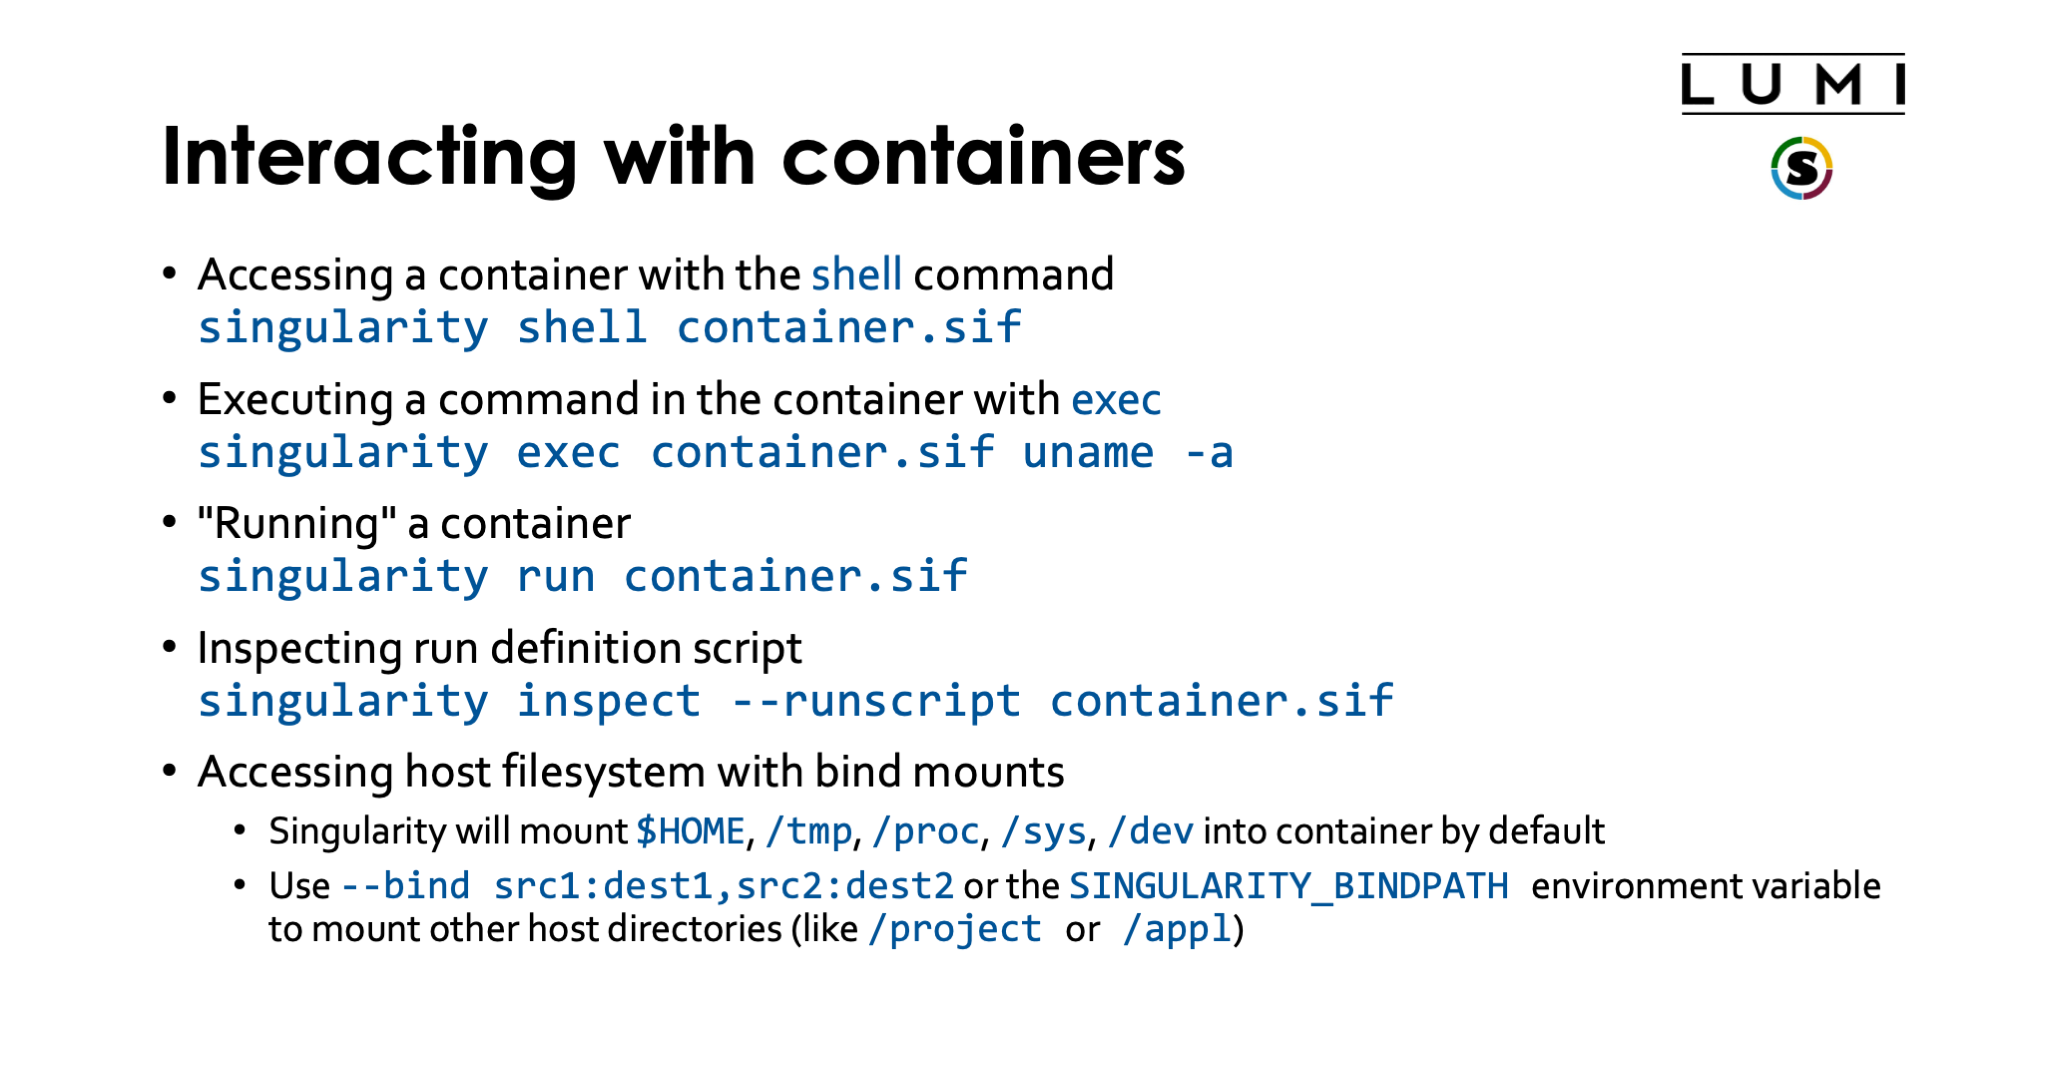 Interacting with containers